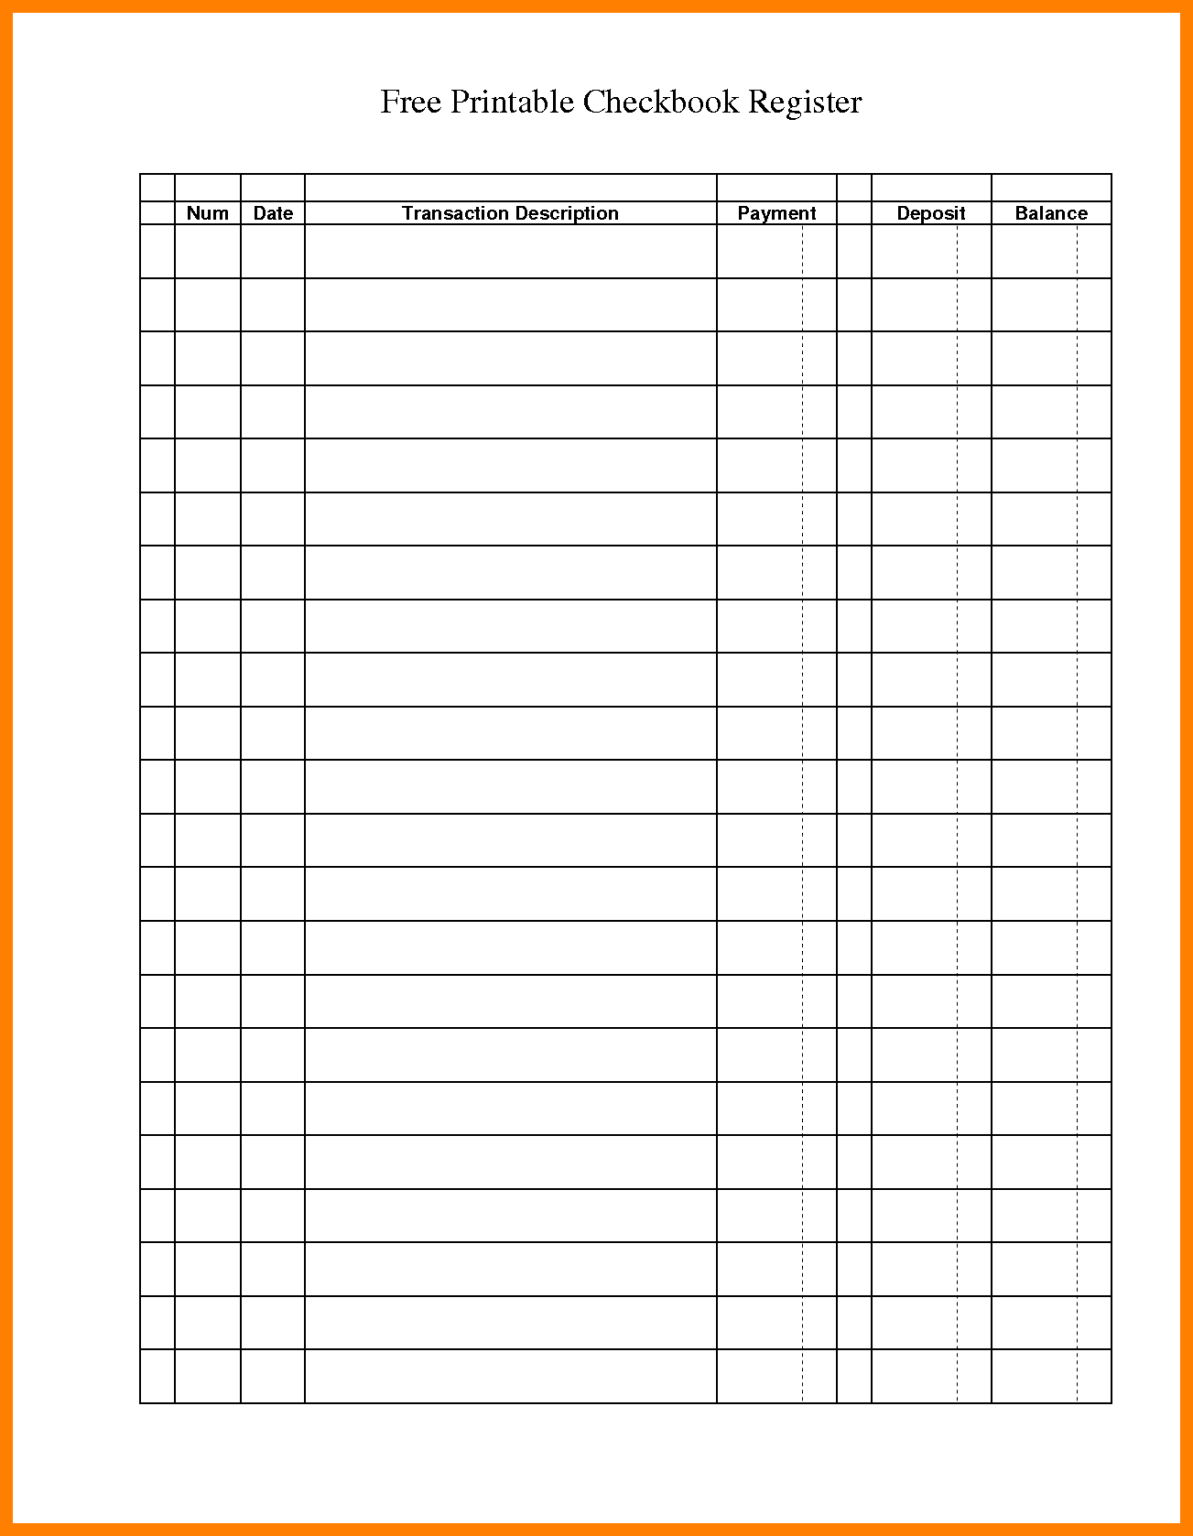 7-best-images-of-accounting-ledger-template-printable-free-printable